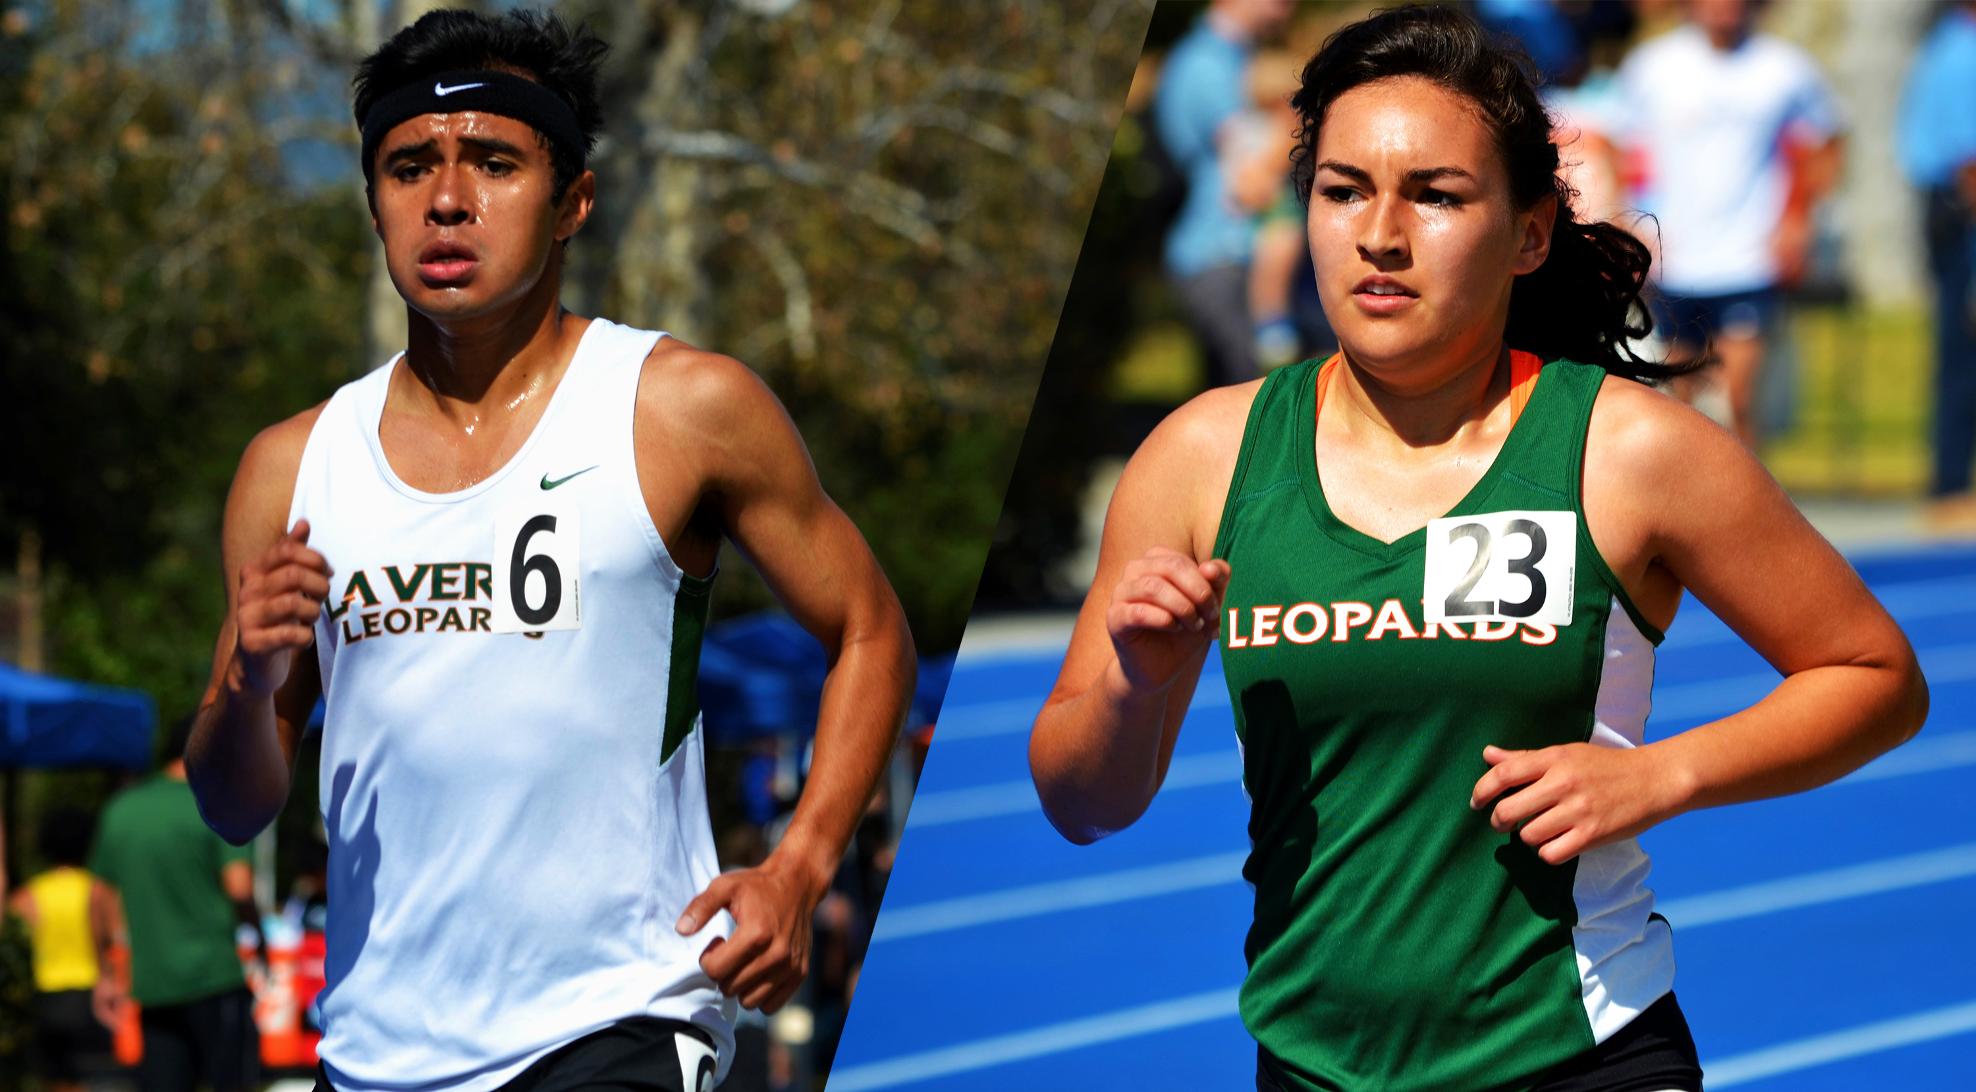 Track & Field competes at Oxy Distance Carnival